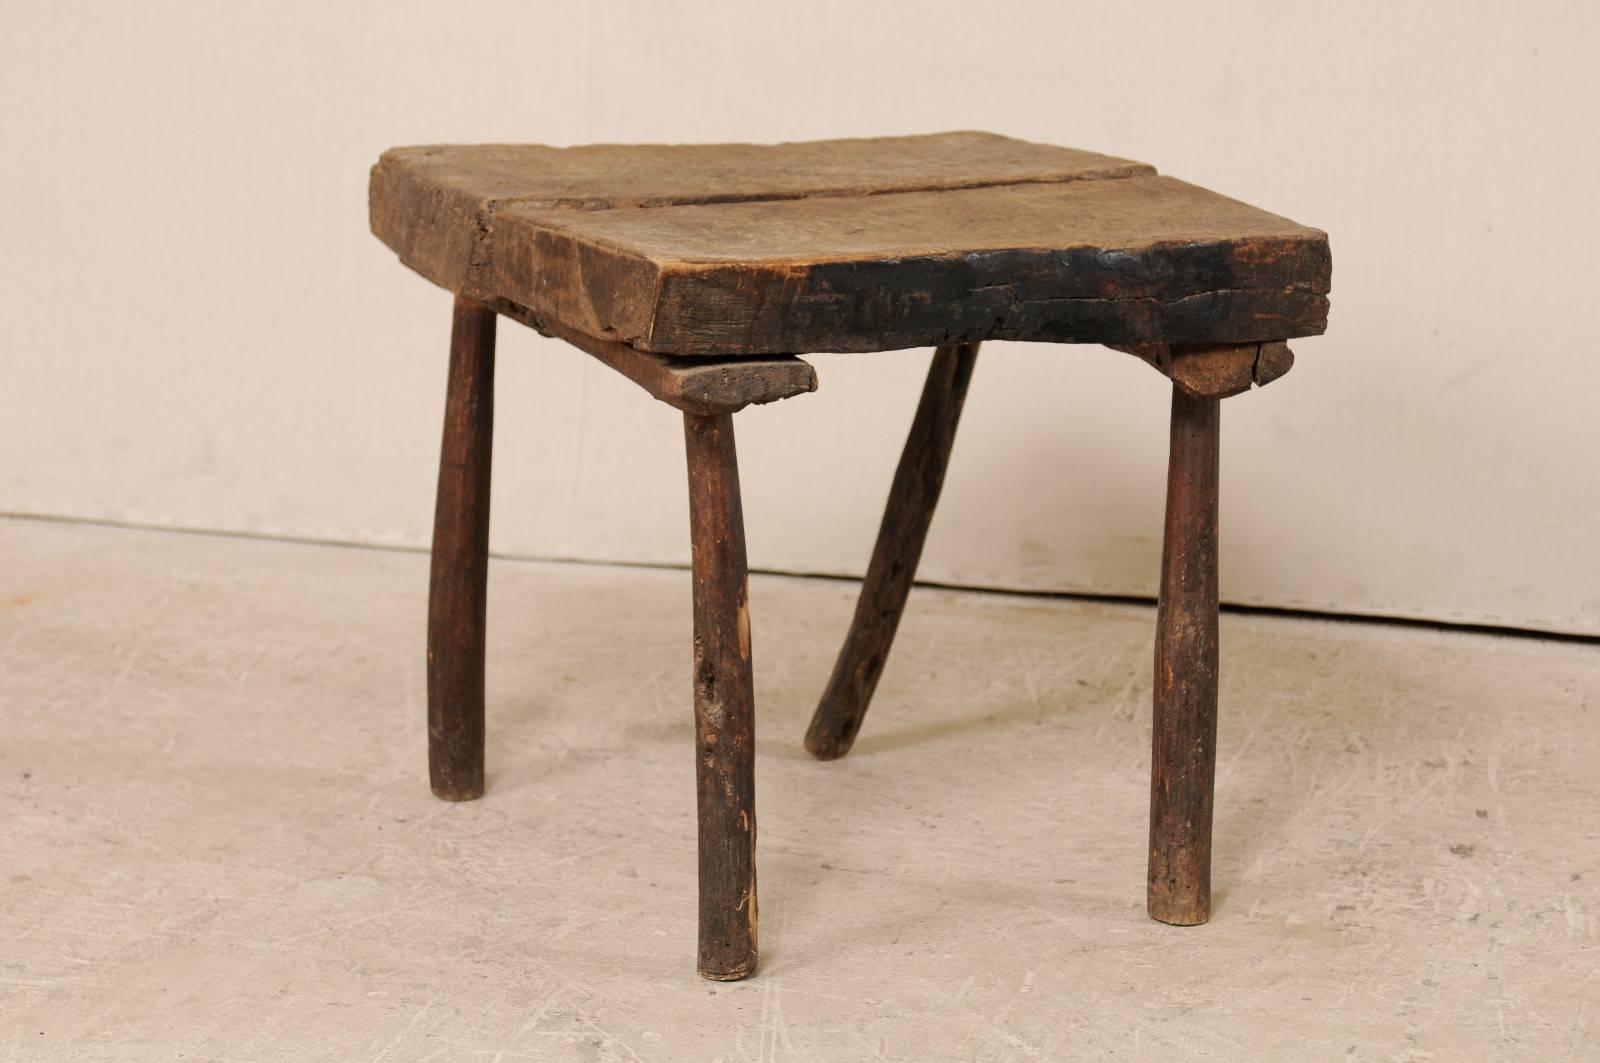 A French, 19th century side table. This rustic French side table features a thick, square-shaped top which is raised up on four twig legs. The table is oakwood, which has a nice rich earthy patina, and great show of age and its history. This